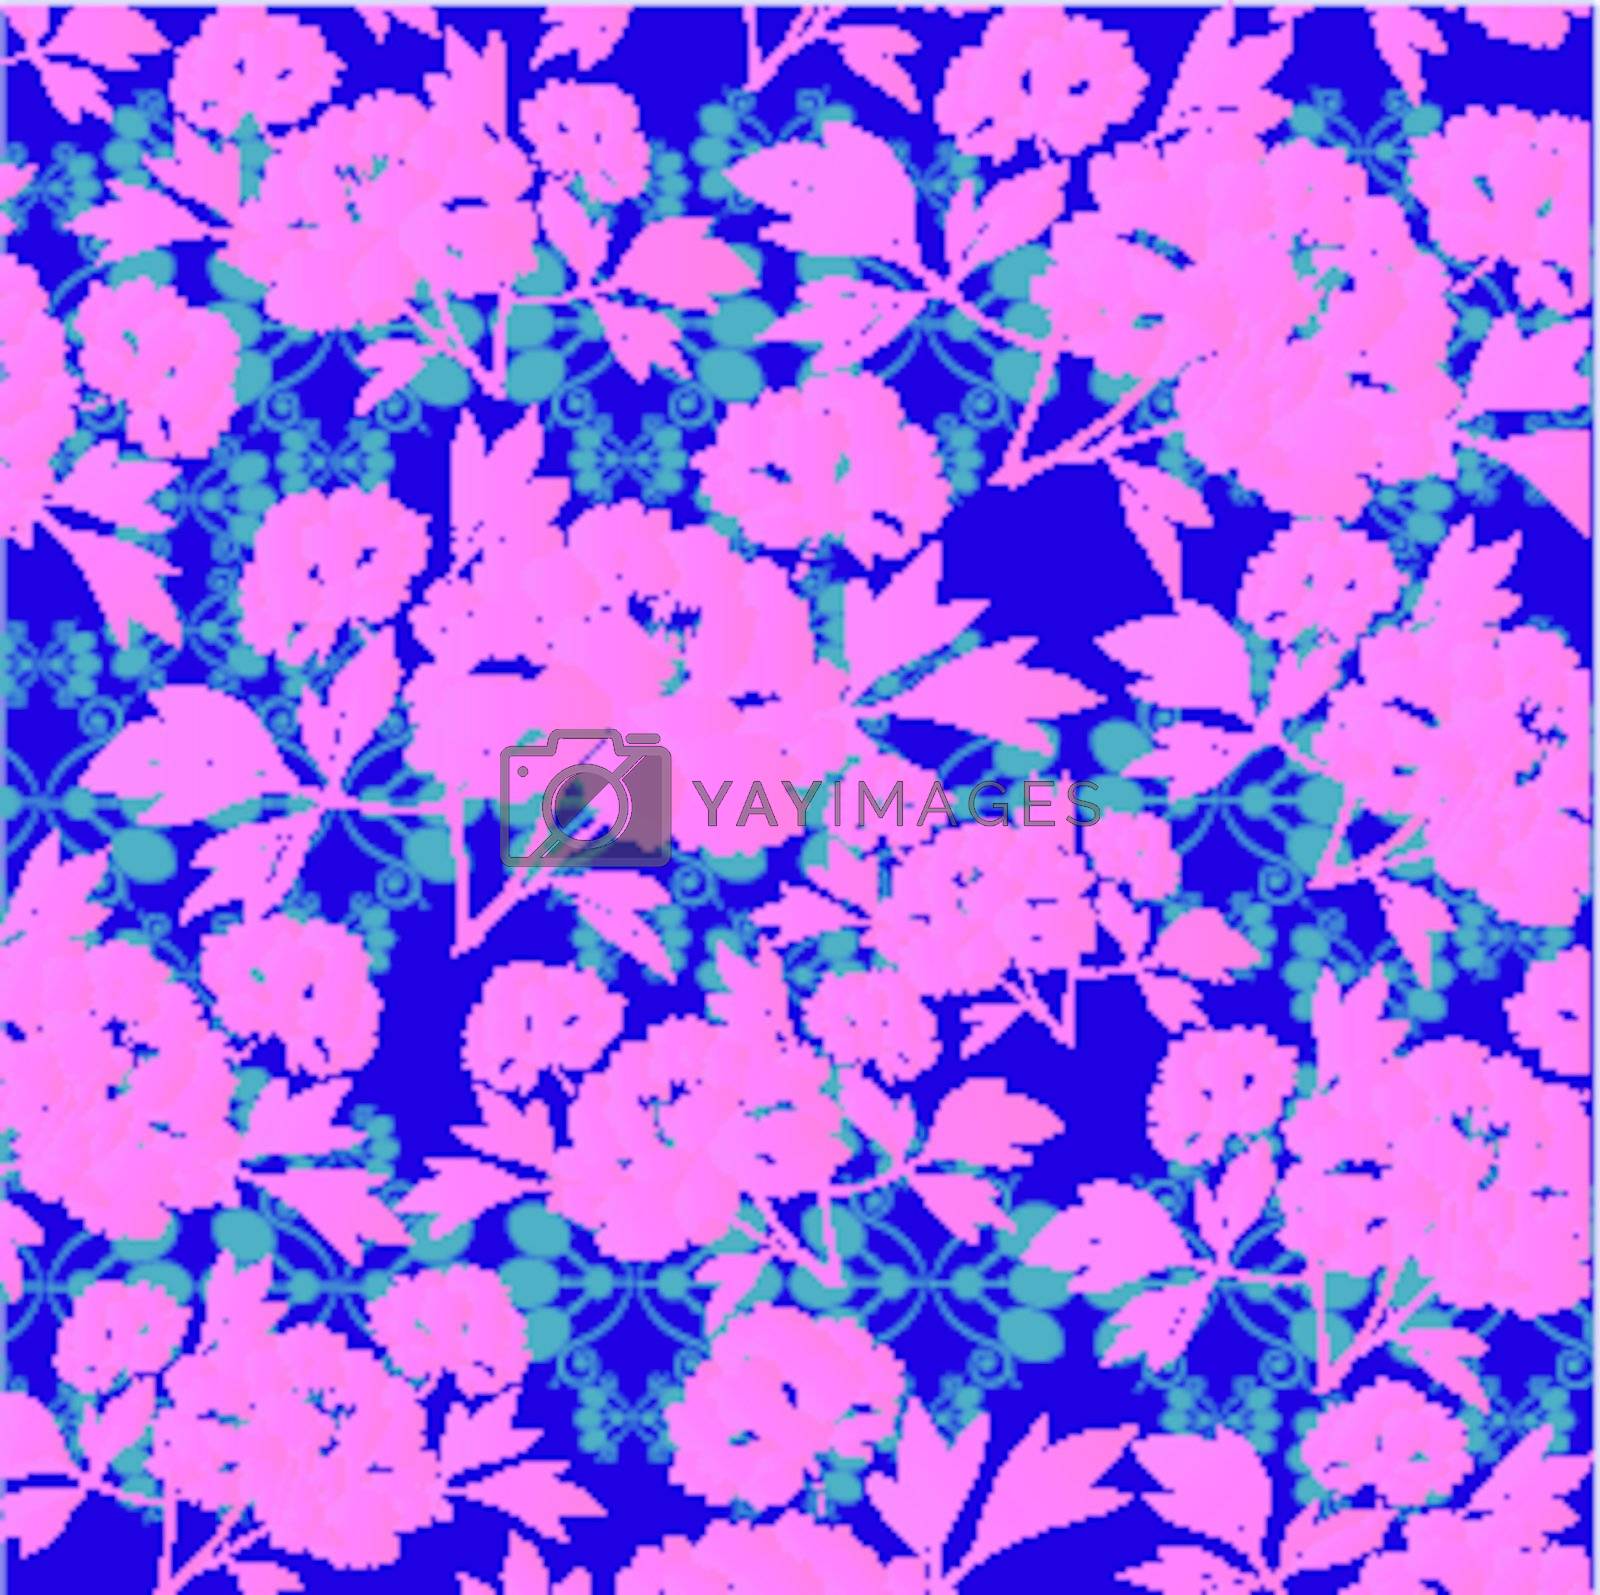 Royalty free image of pink flowers on blue background by catrinel